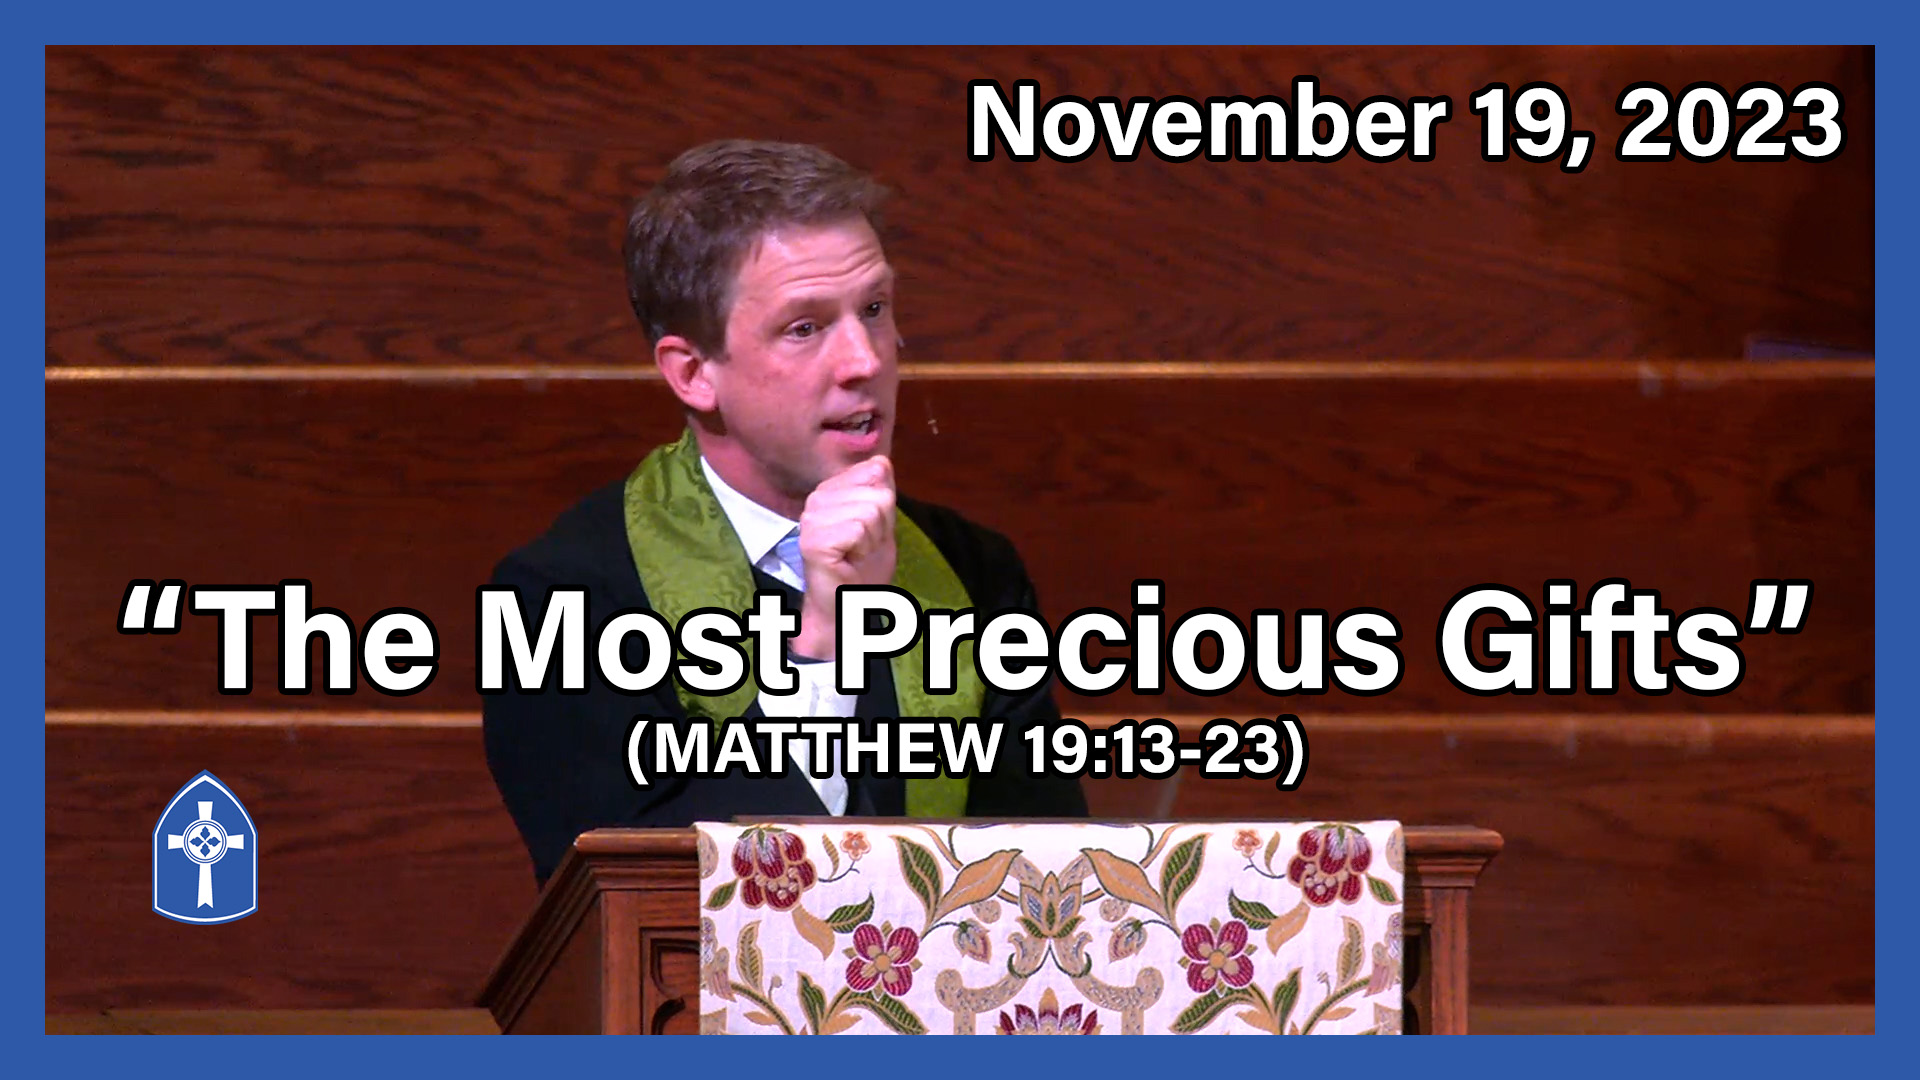 November 19 - The Most Precious Gifts